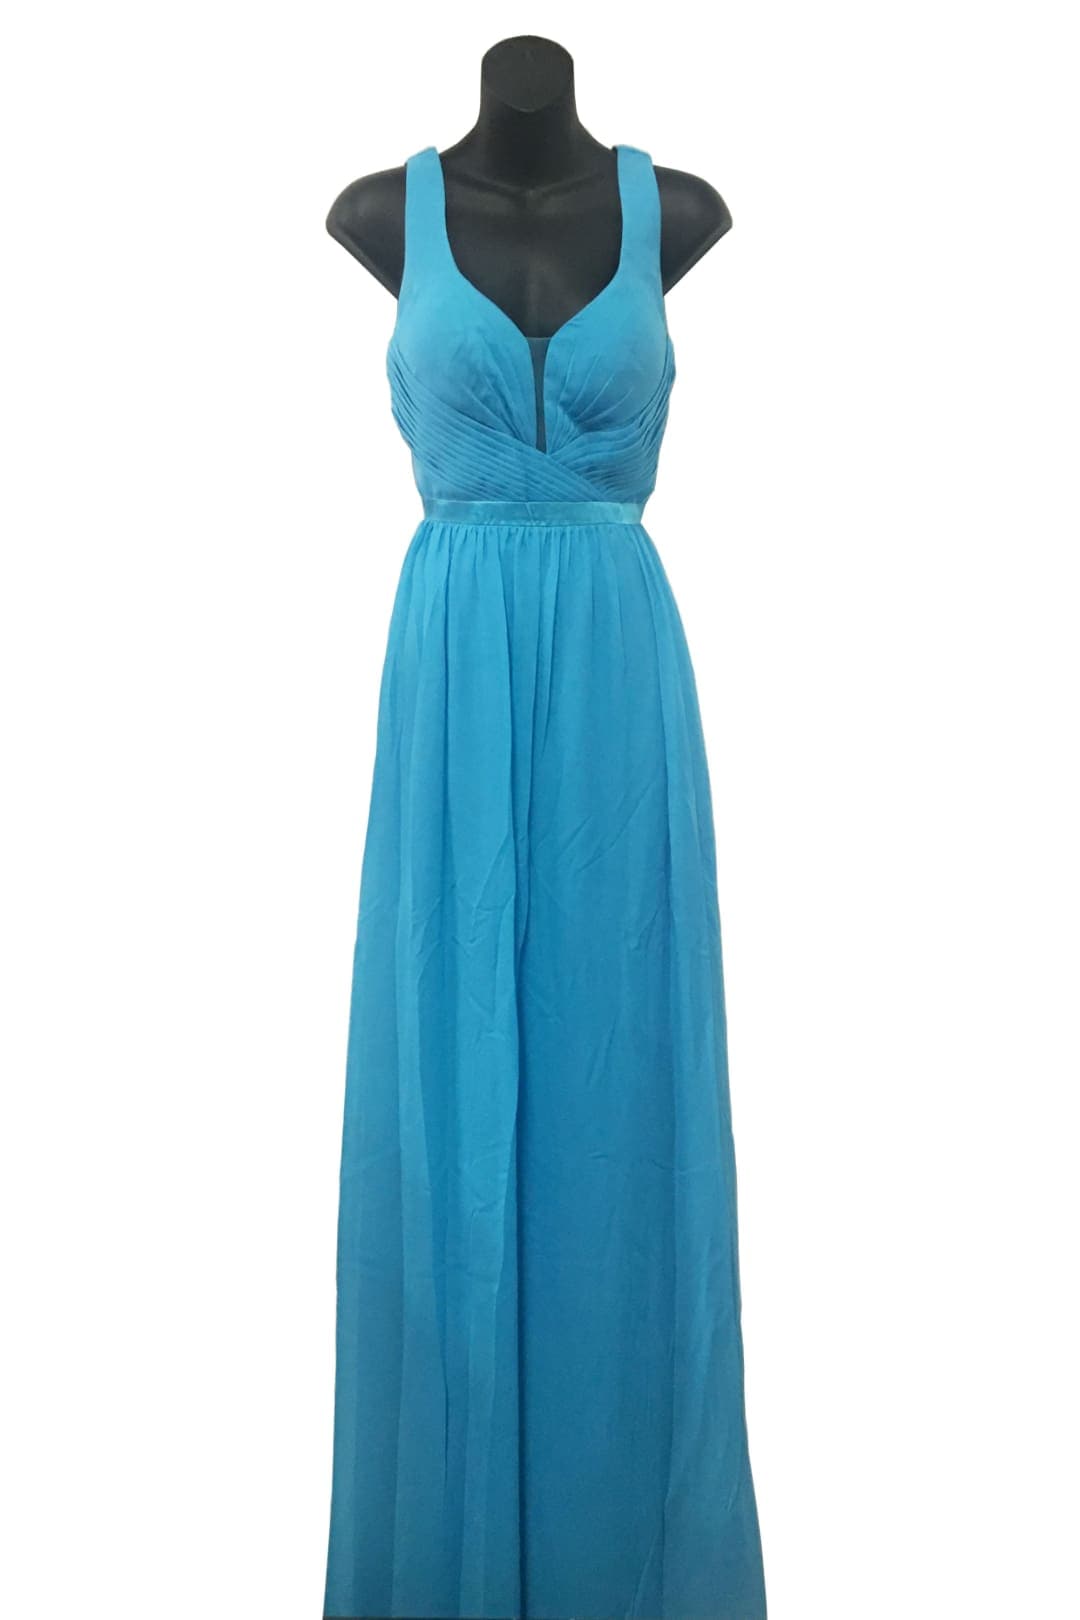 May Queen MQ1225B Simple Plunging Sweetheart Pleated Evening Dress - Turquoise / 4